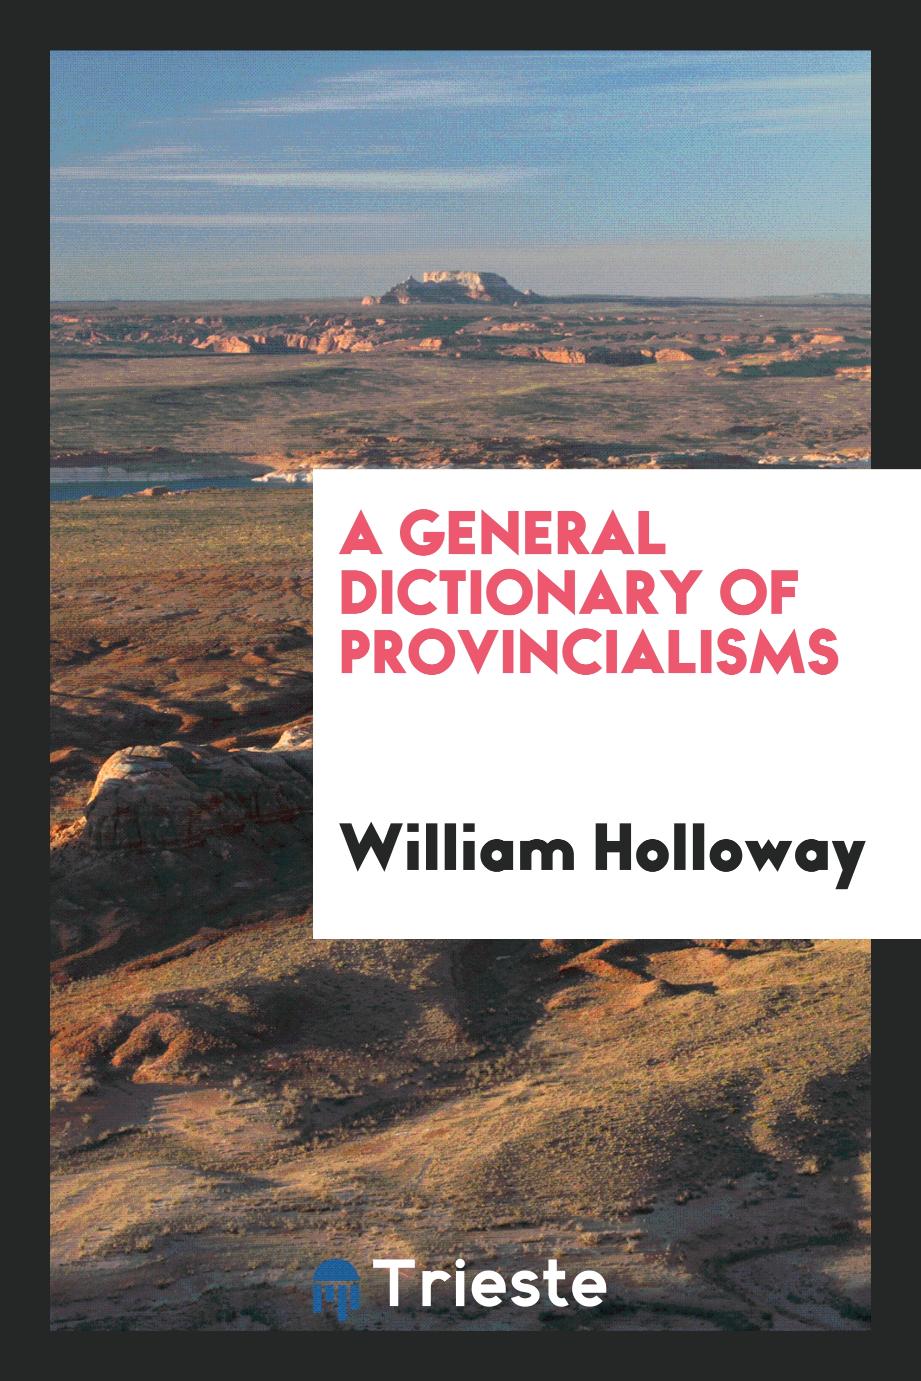 William Holloway - A General Dictionary of Provincialisms